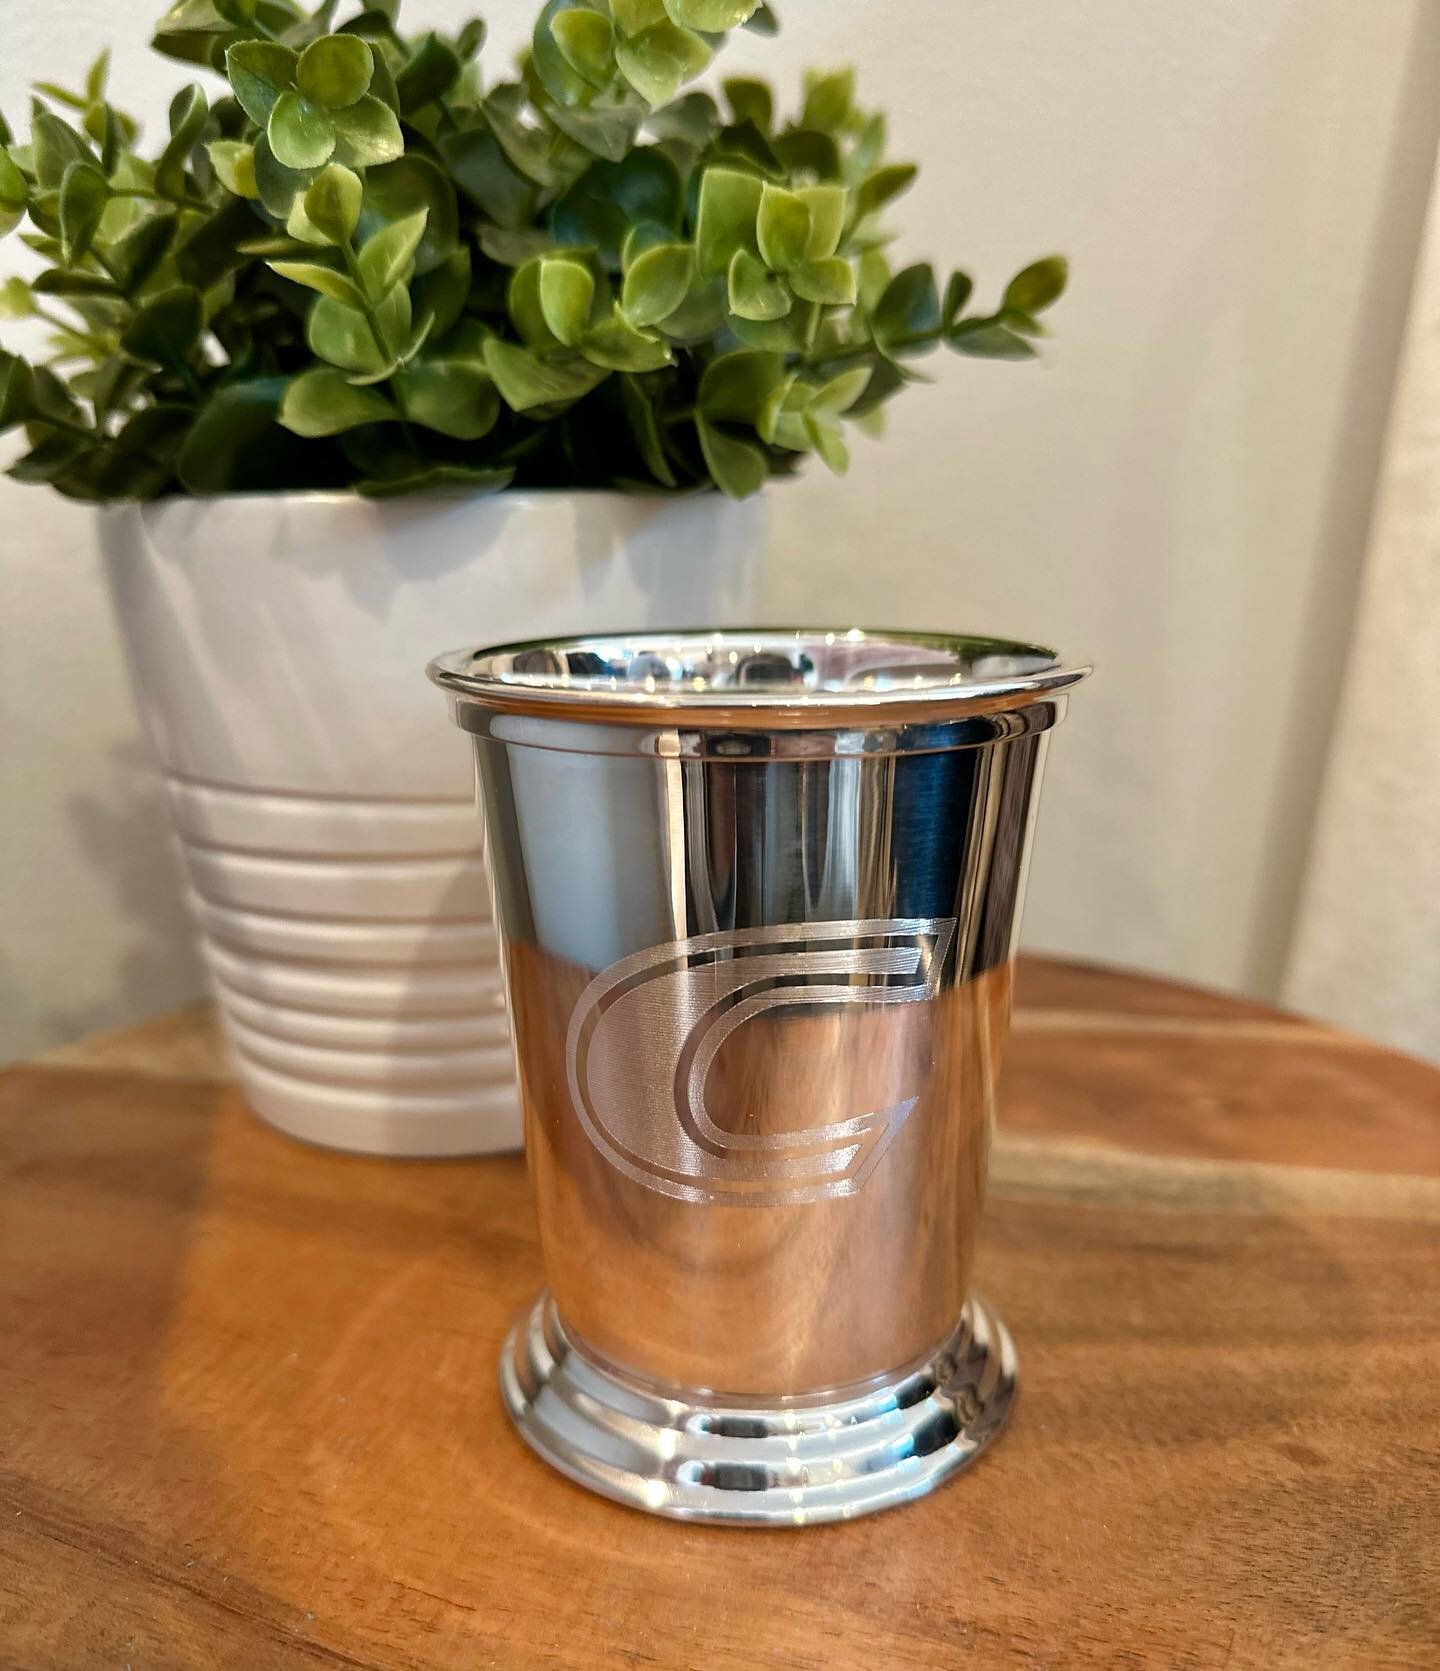 Cheers to Centre College with these custom etched Mint Julep cups! 💛
&bull;
&bull;
&bull;
&bull;
&bull;
#mintjulep #kentucky #centrecollege #promotionalproducts #lexingtonky #localbusiness #cheers #custom #etching